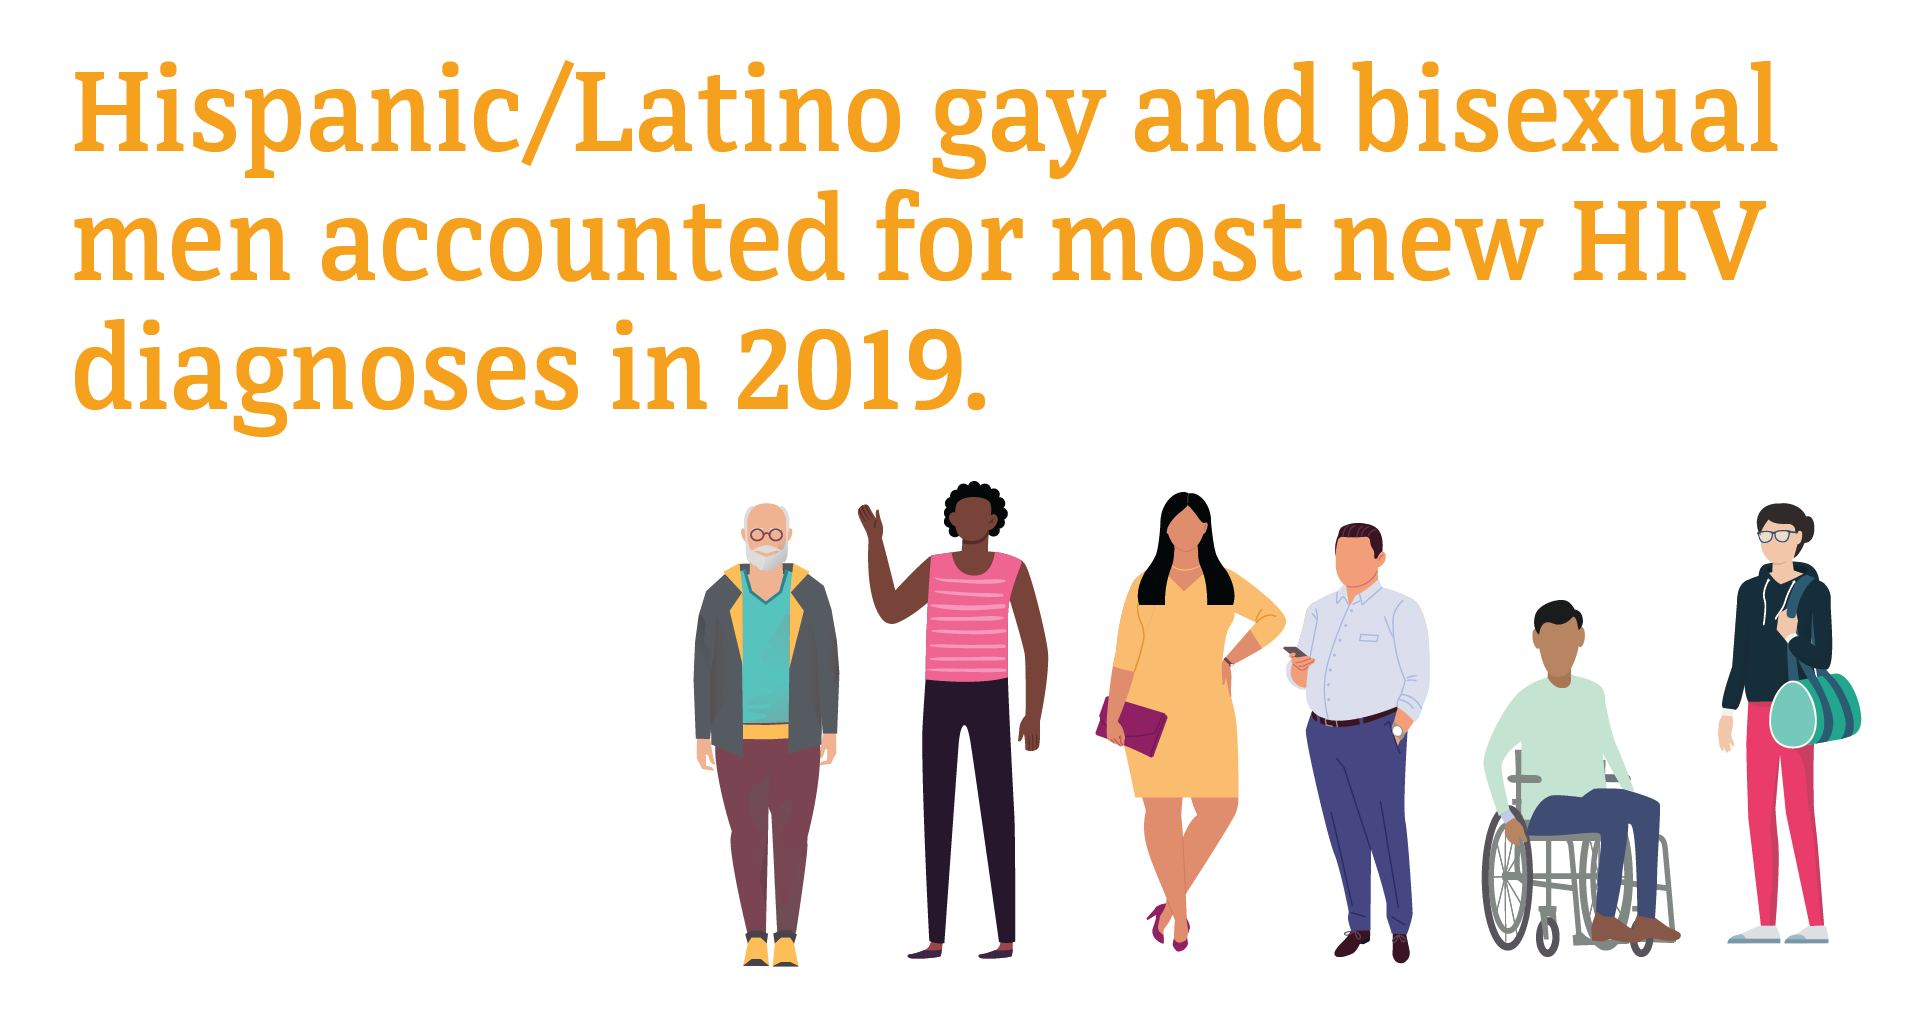 Hispanic/Latino gay and bisexual men accounted for most new HIV diagnoses in 2019.